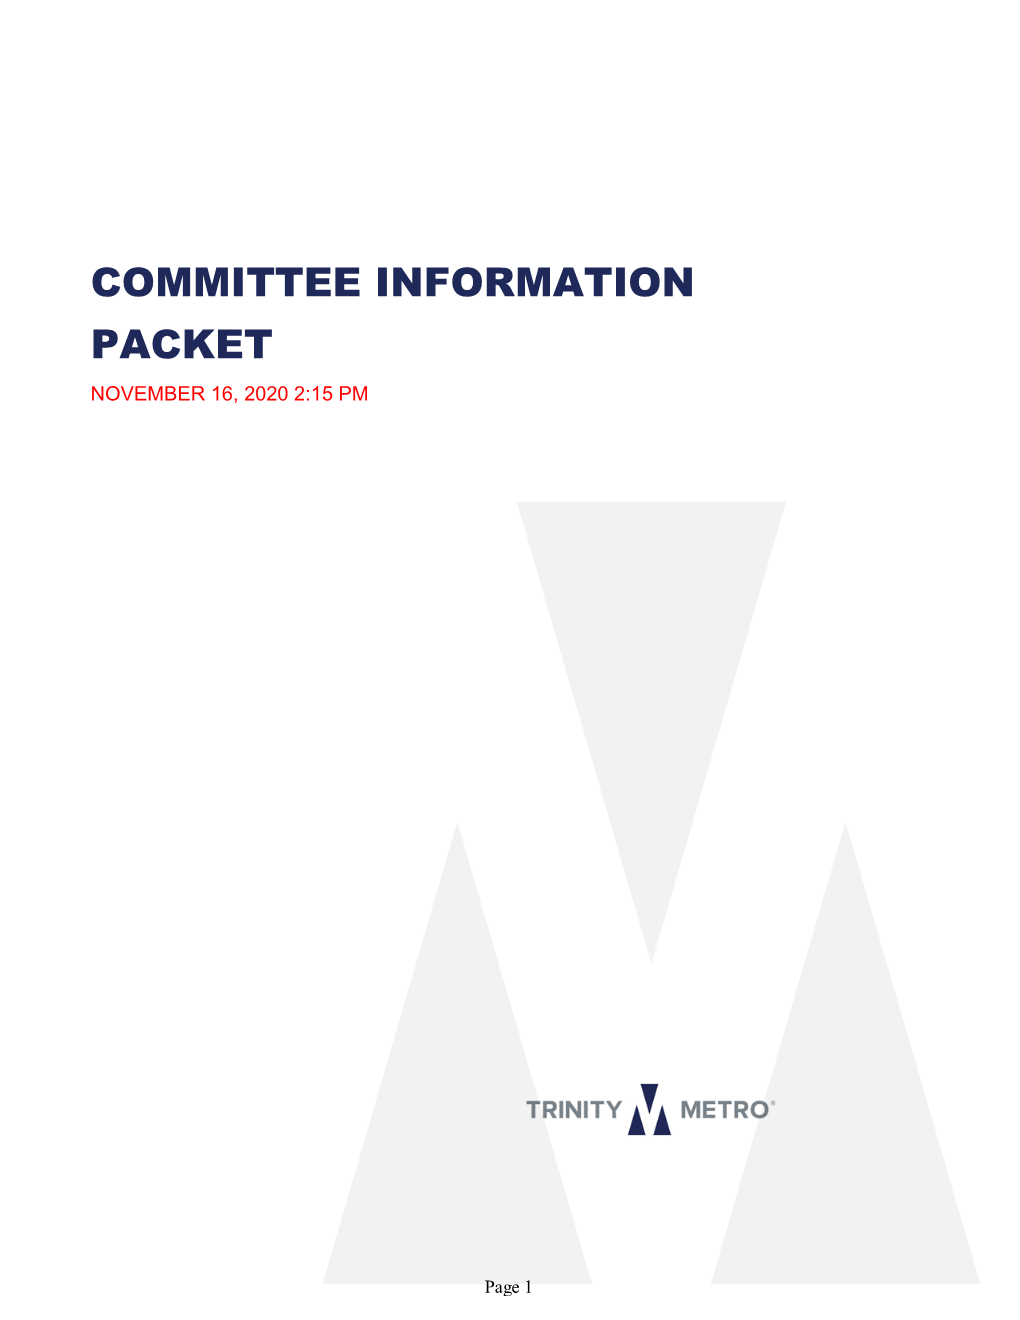 Committee Information Packet